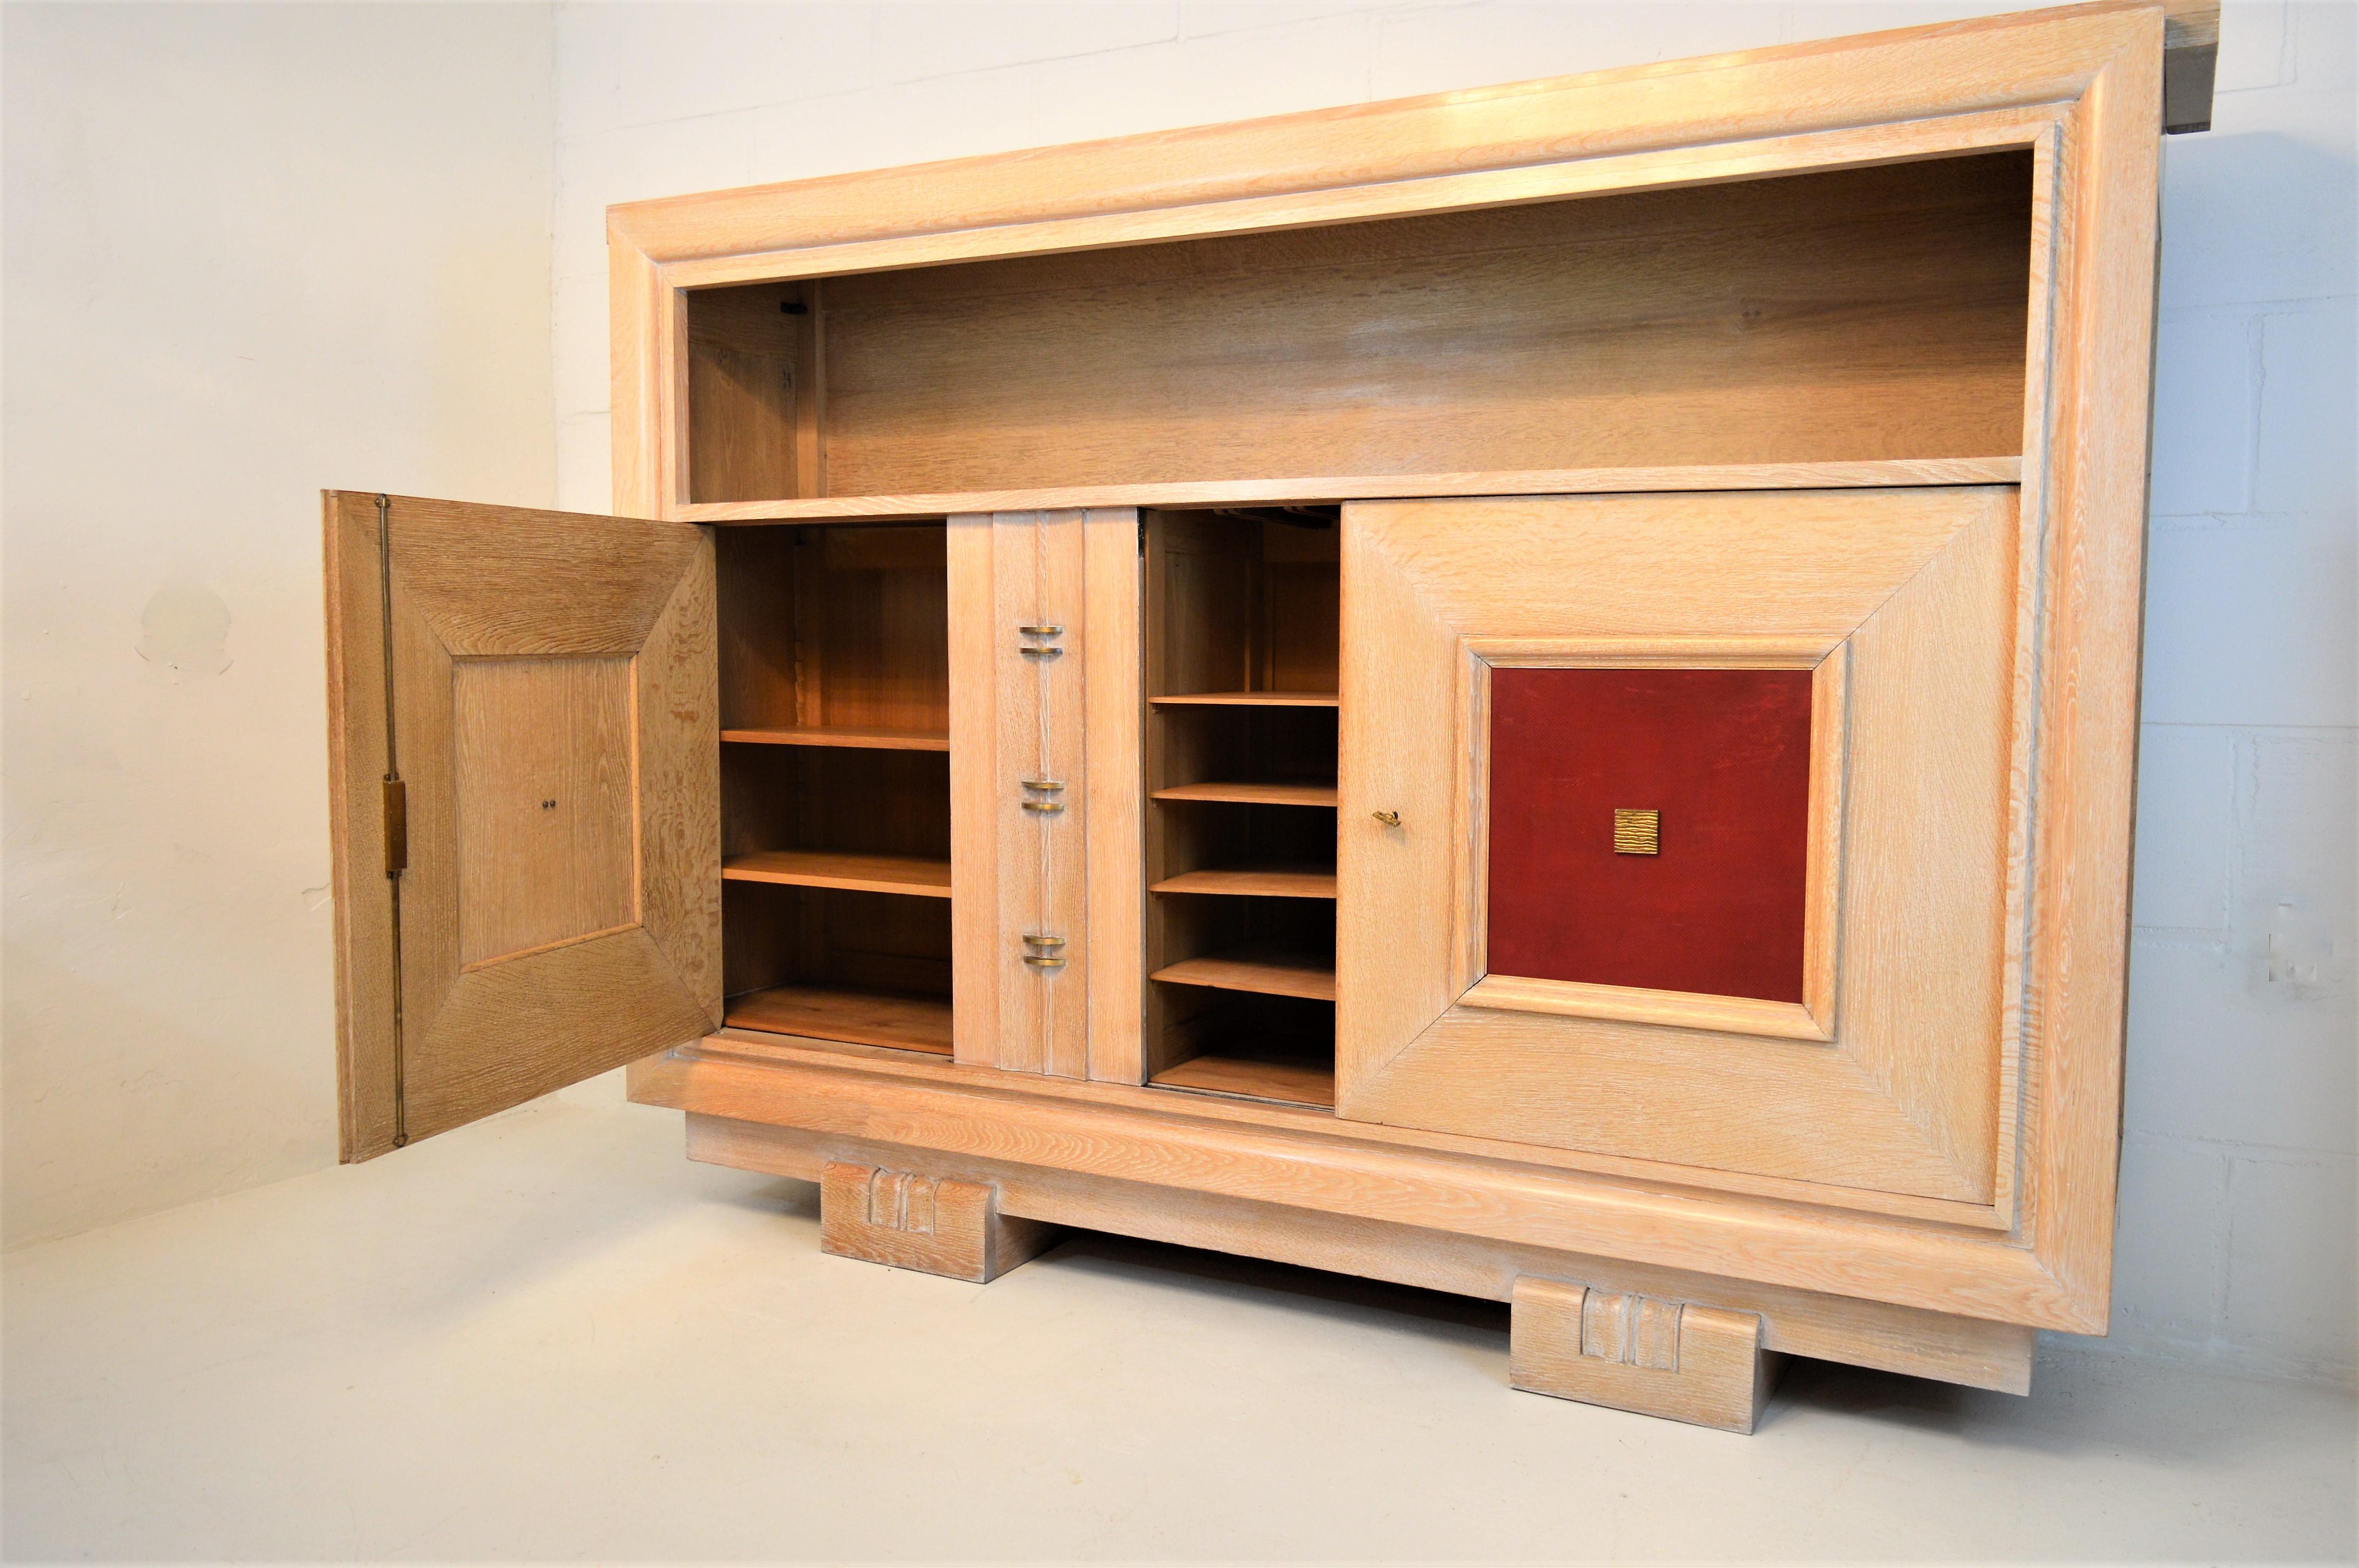 Bronze Charles Dudouyt Masterpiece Oak Cabinet, with Doorpanels Covered in Red Leather